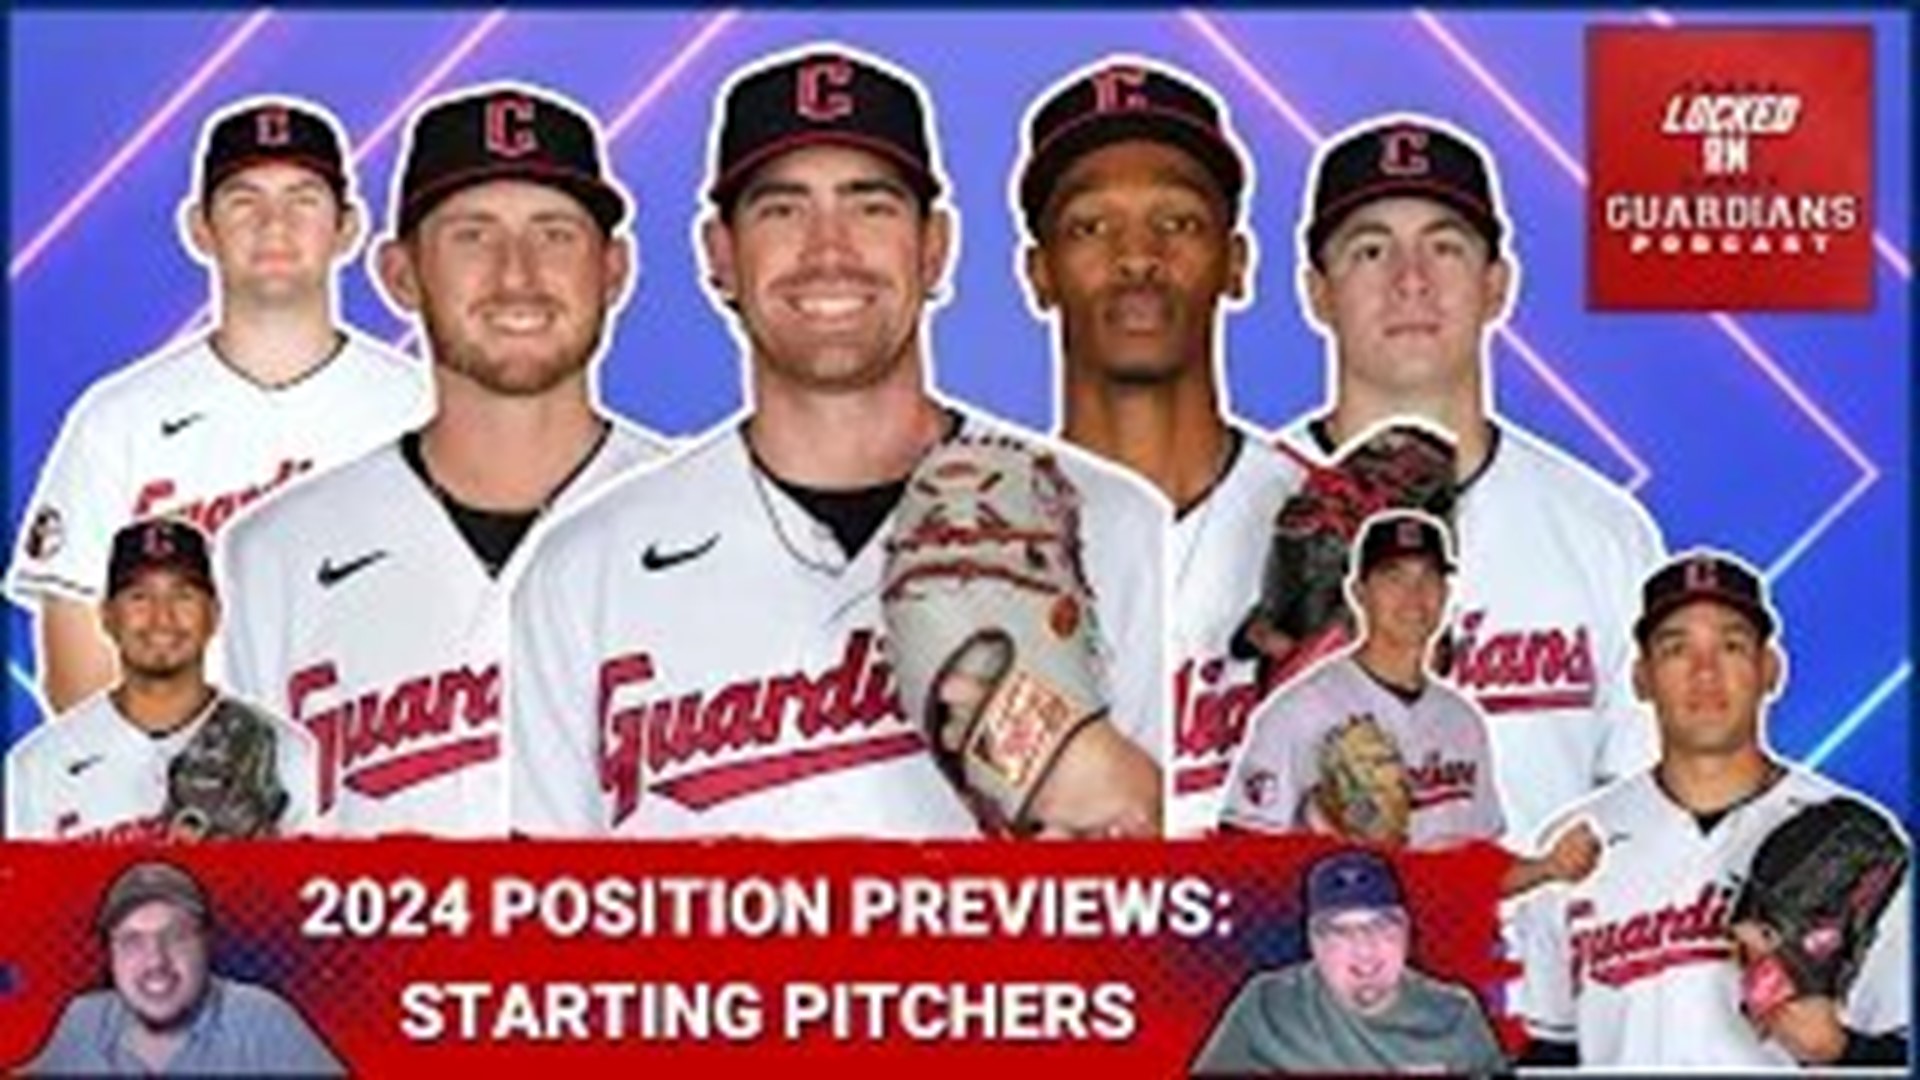 We're rolling through our 2024 Cleveland Guardians position preview series, discussing the Guardians starting rotation. Will the Fab 5 make the majority of starts?